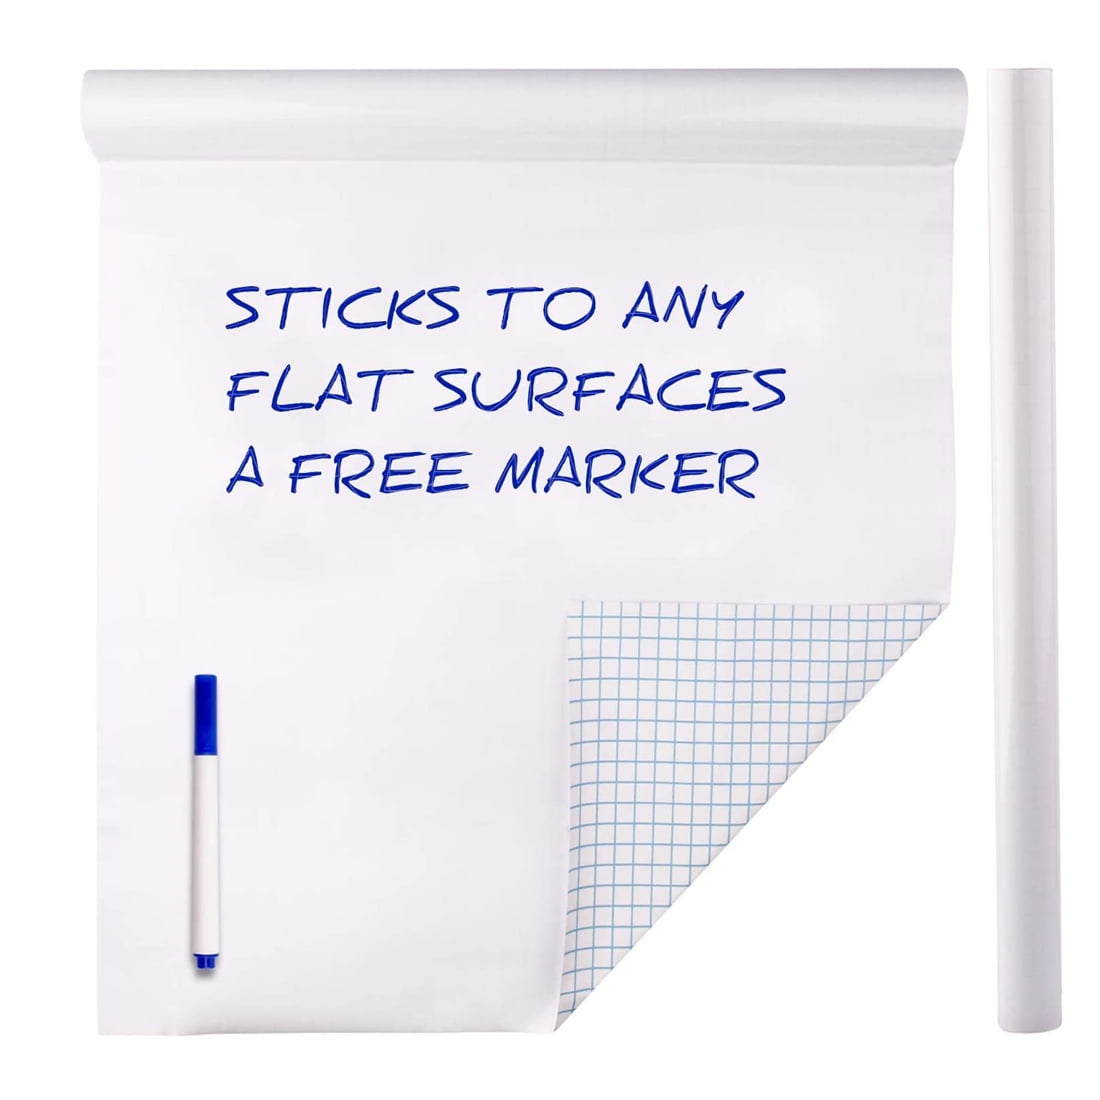 Details about   Dry Erase Chalkboard Sticker Whiteboard Writing Wallpaper Home Office Supplies 